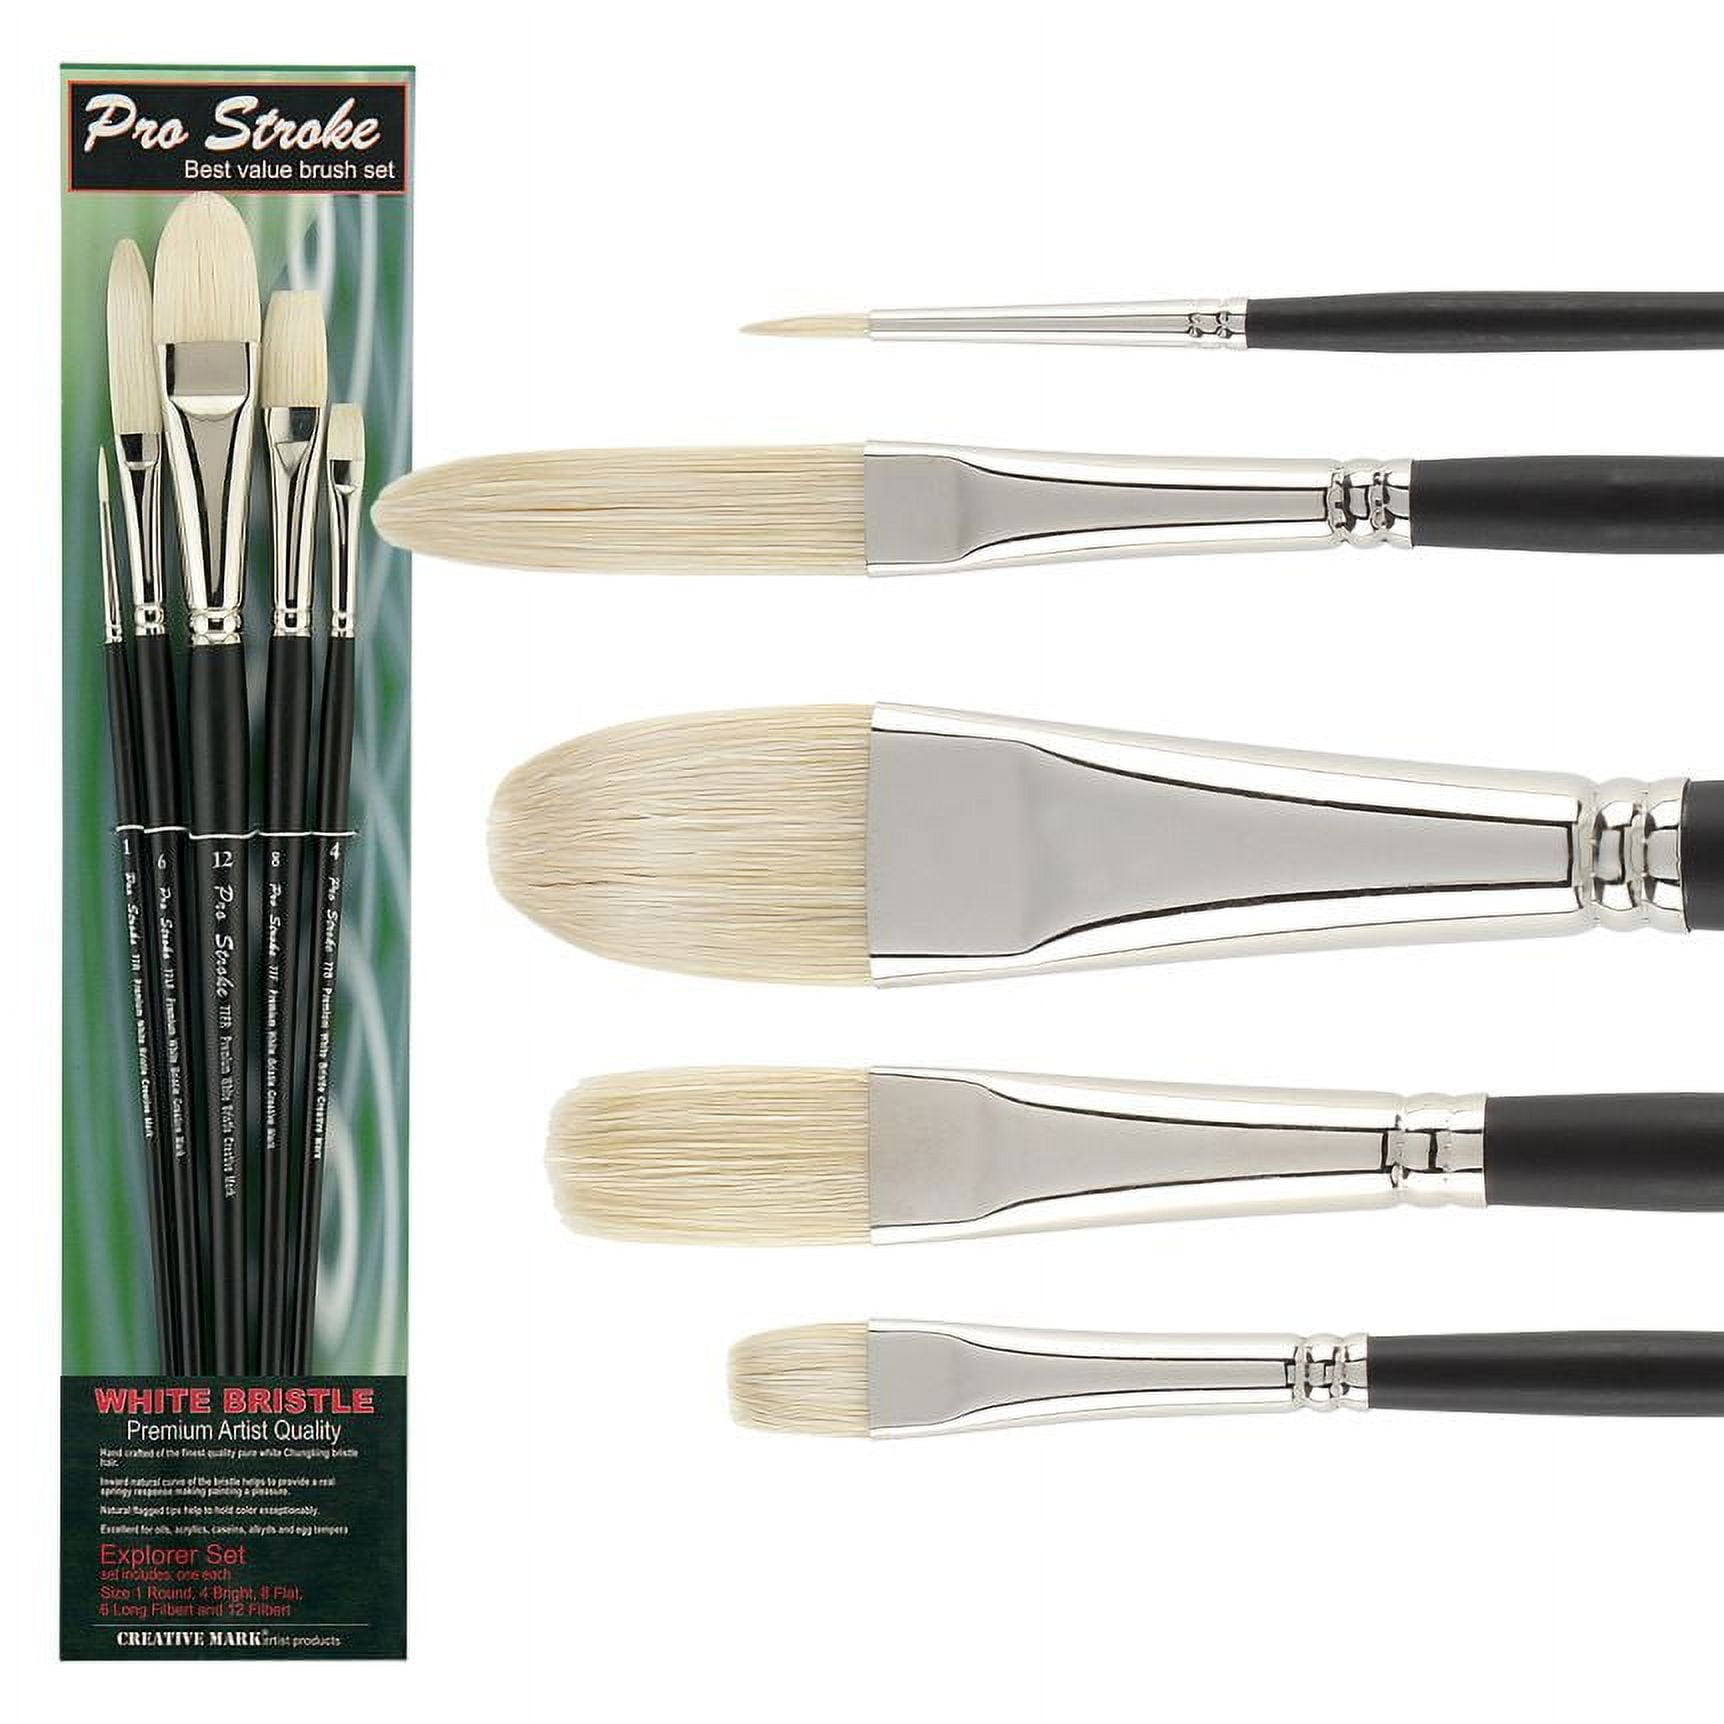 Paint Like a Pro With the New STC Range of Synthetic Brushes